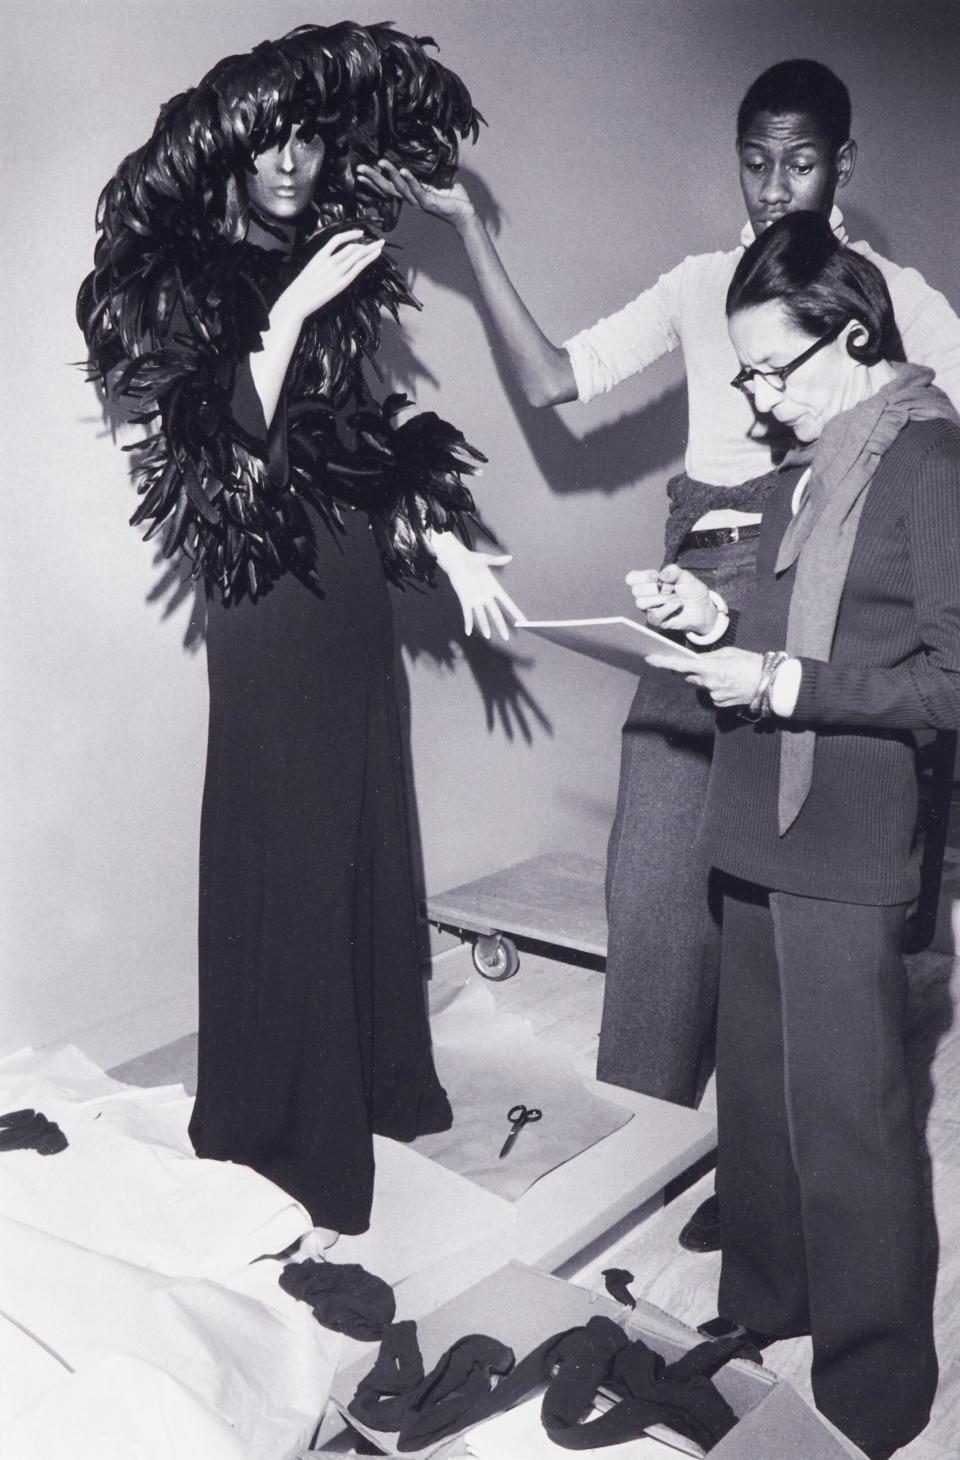 A photo of Diana Vreeland and André Leon Talley from Talley's collection.